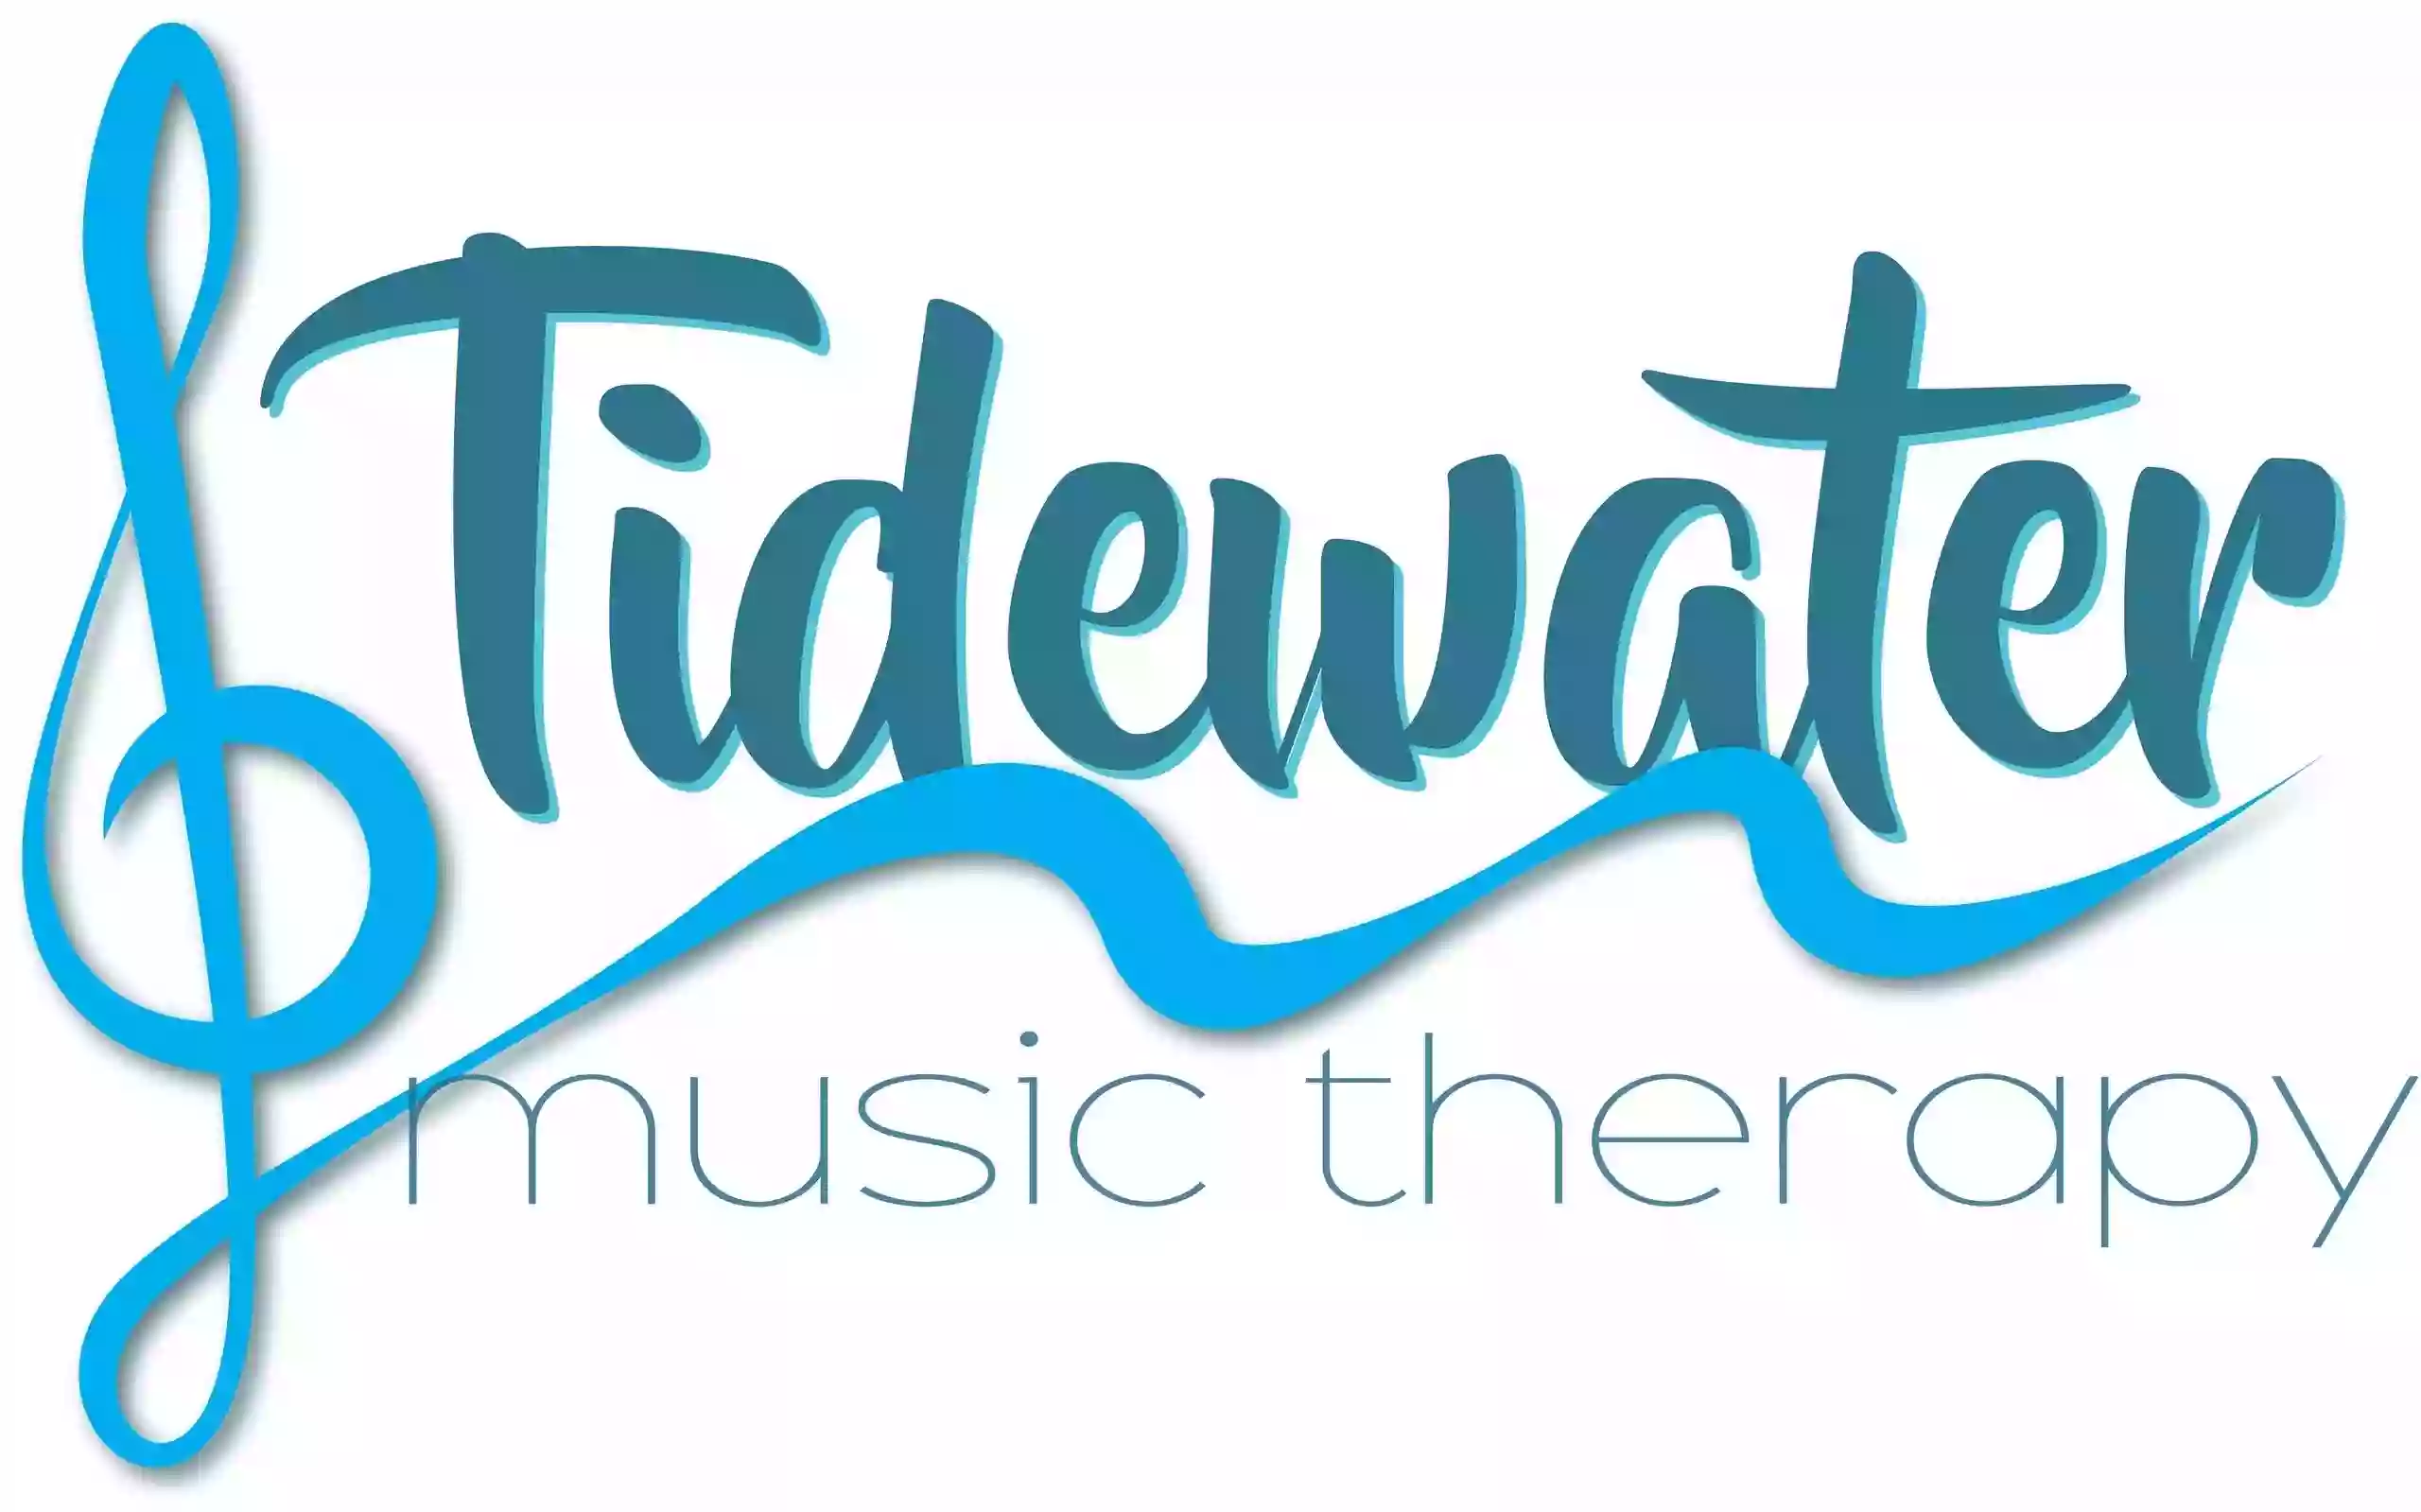 Tidewater Music Therapy